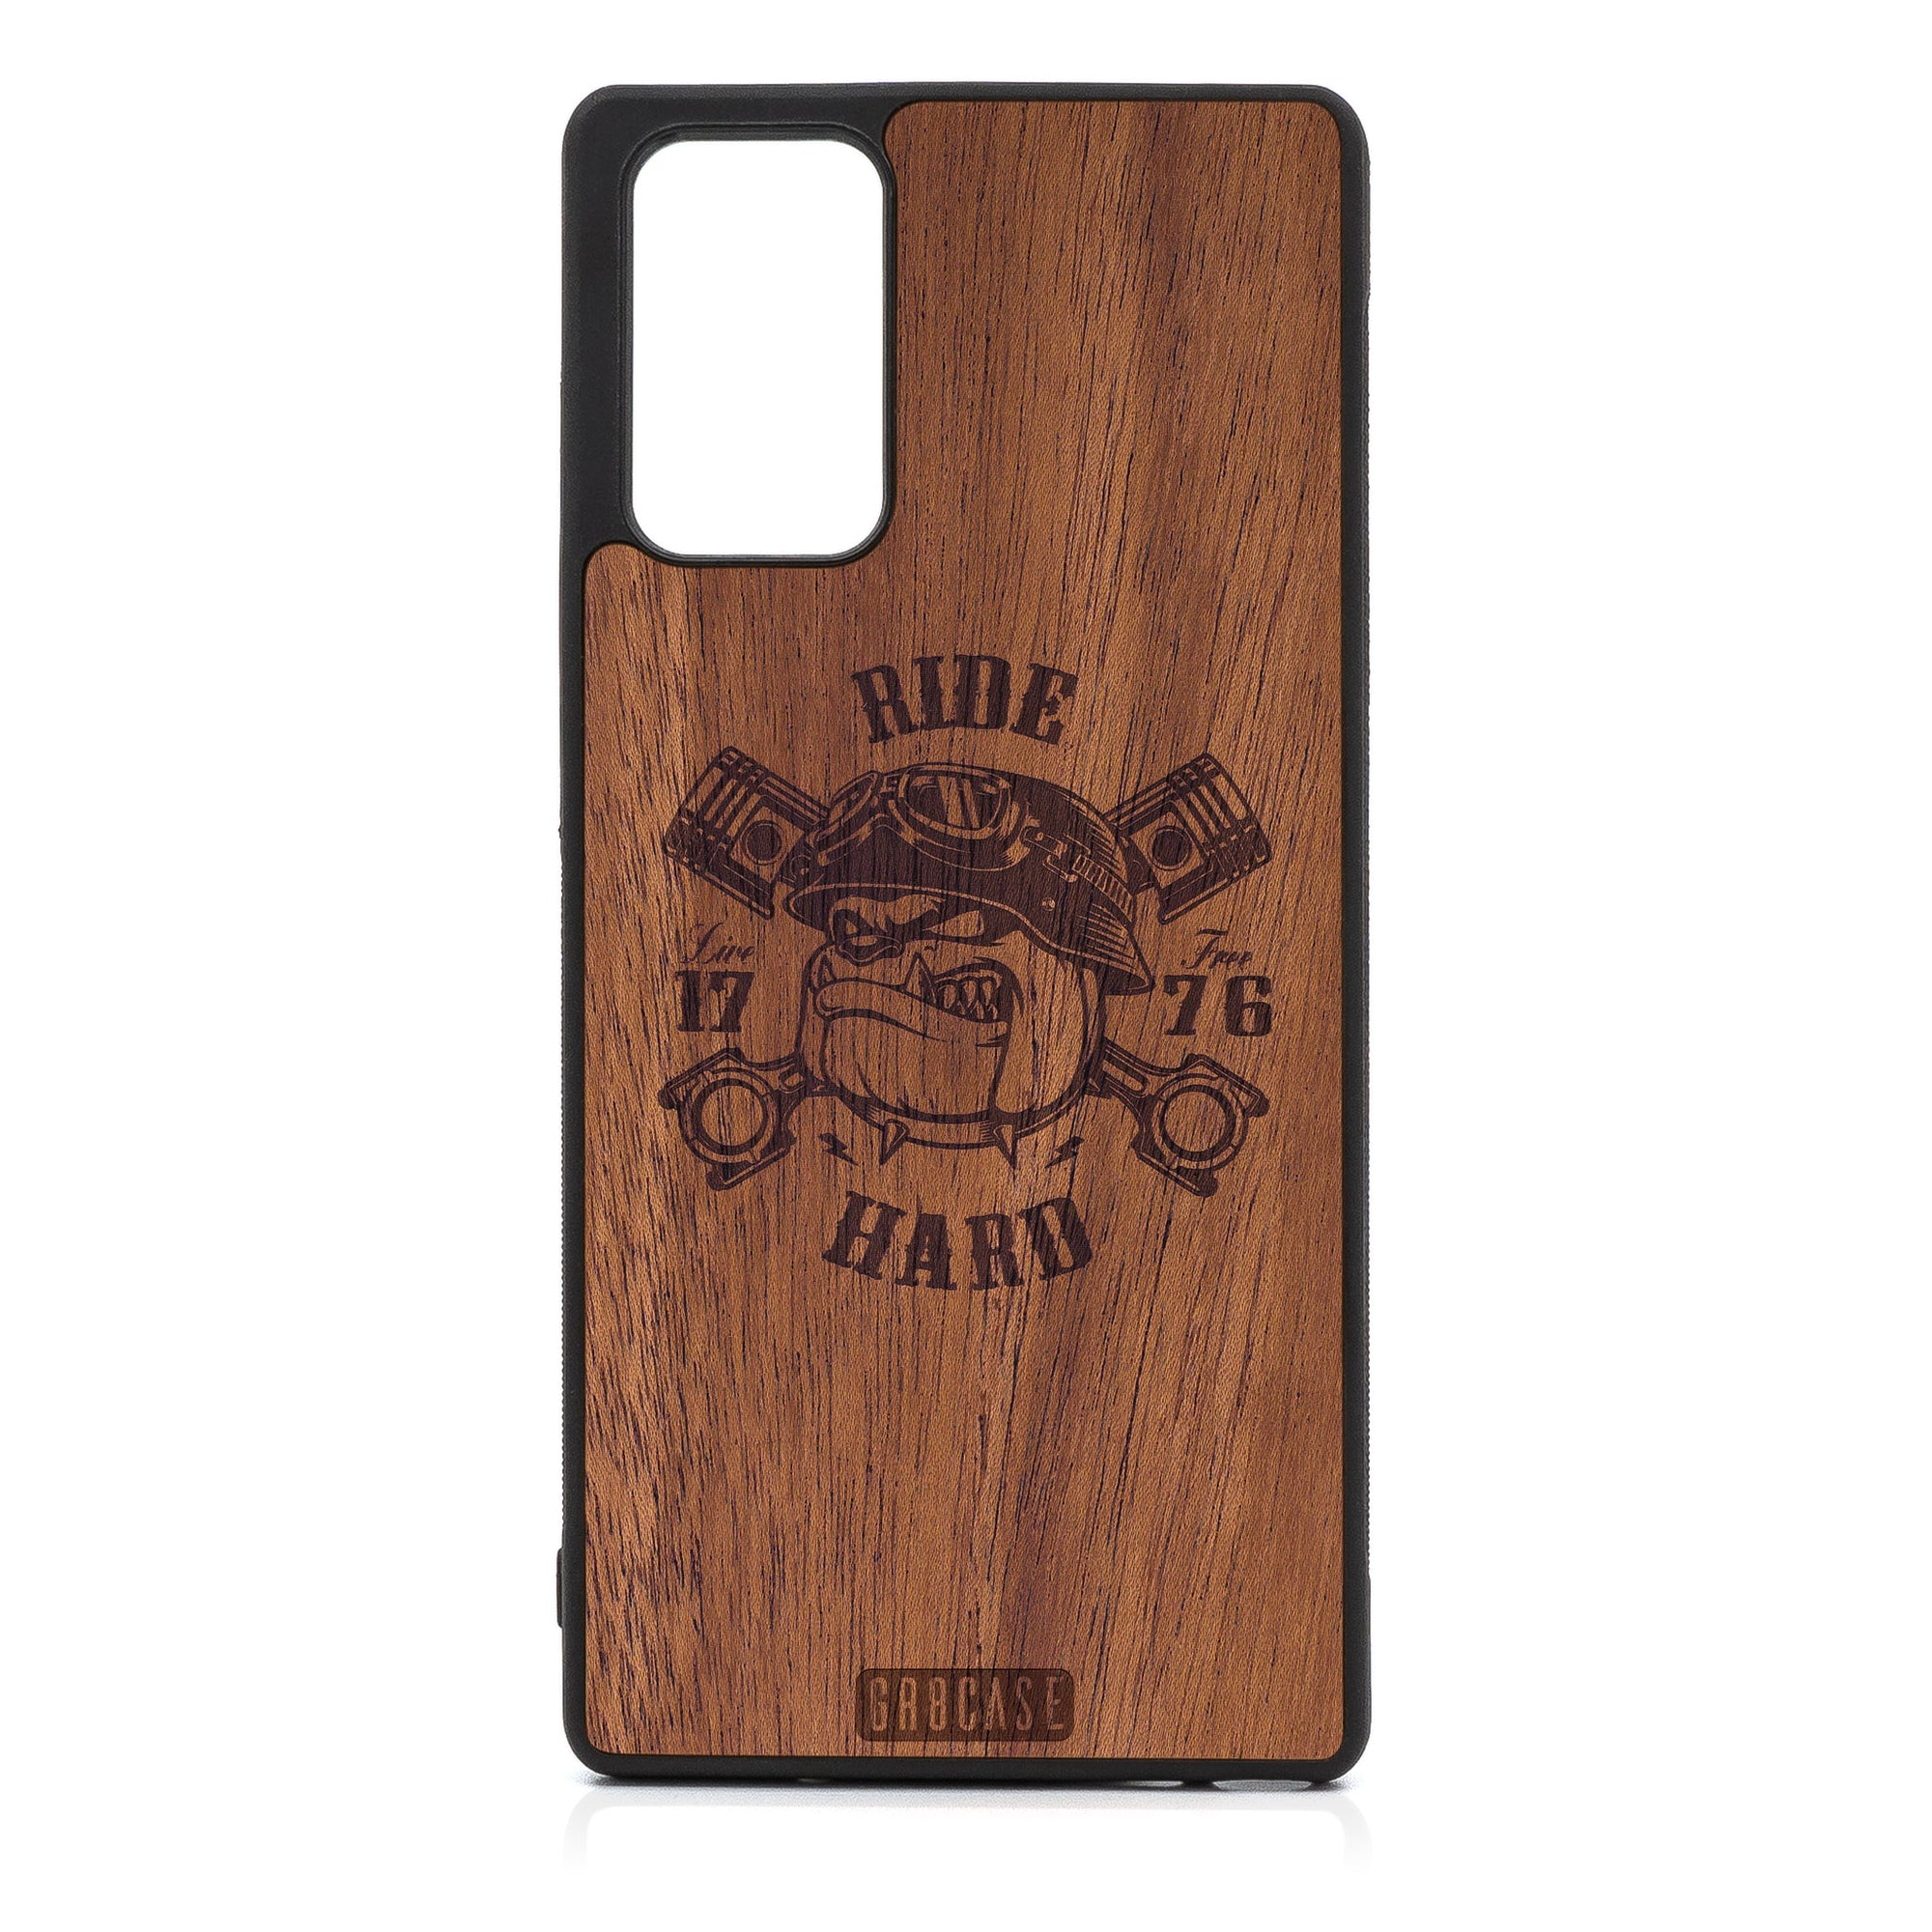 Ride Hard Live Free Design Wood Case For Samsung Galaxy Note 20